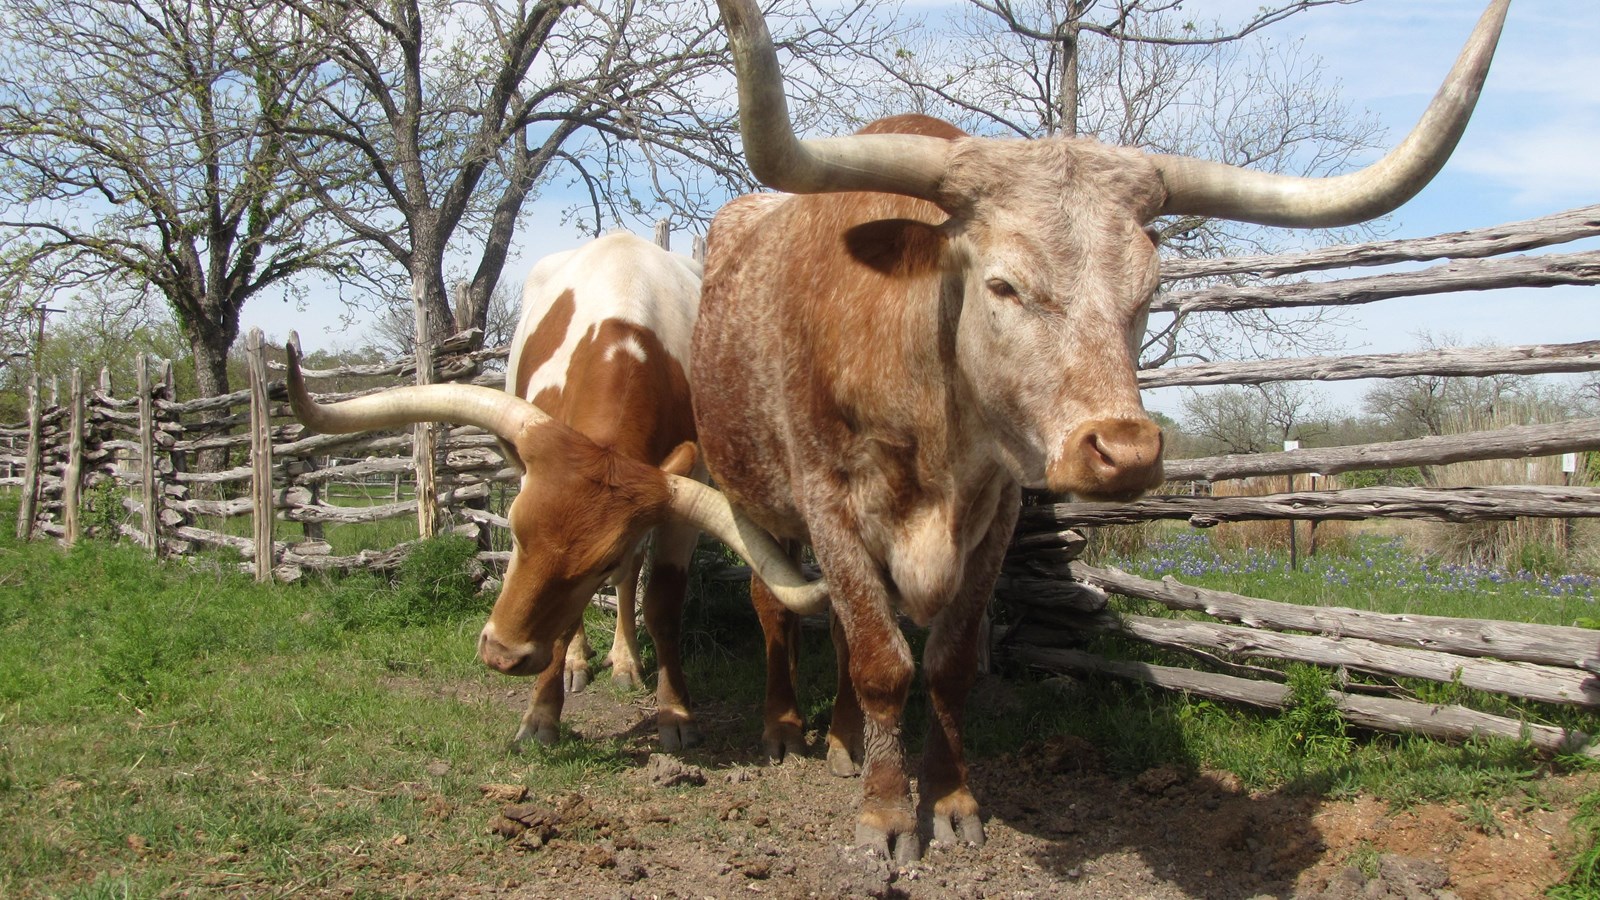 Two, large longhorns stand along a wooden, pioneer fence with trees in the background.